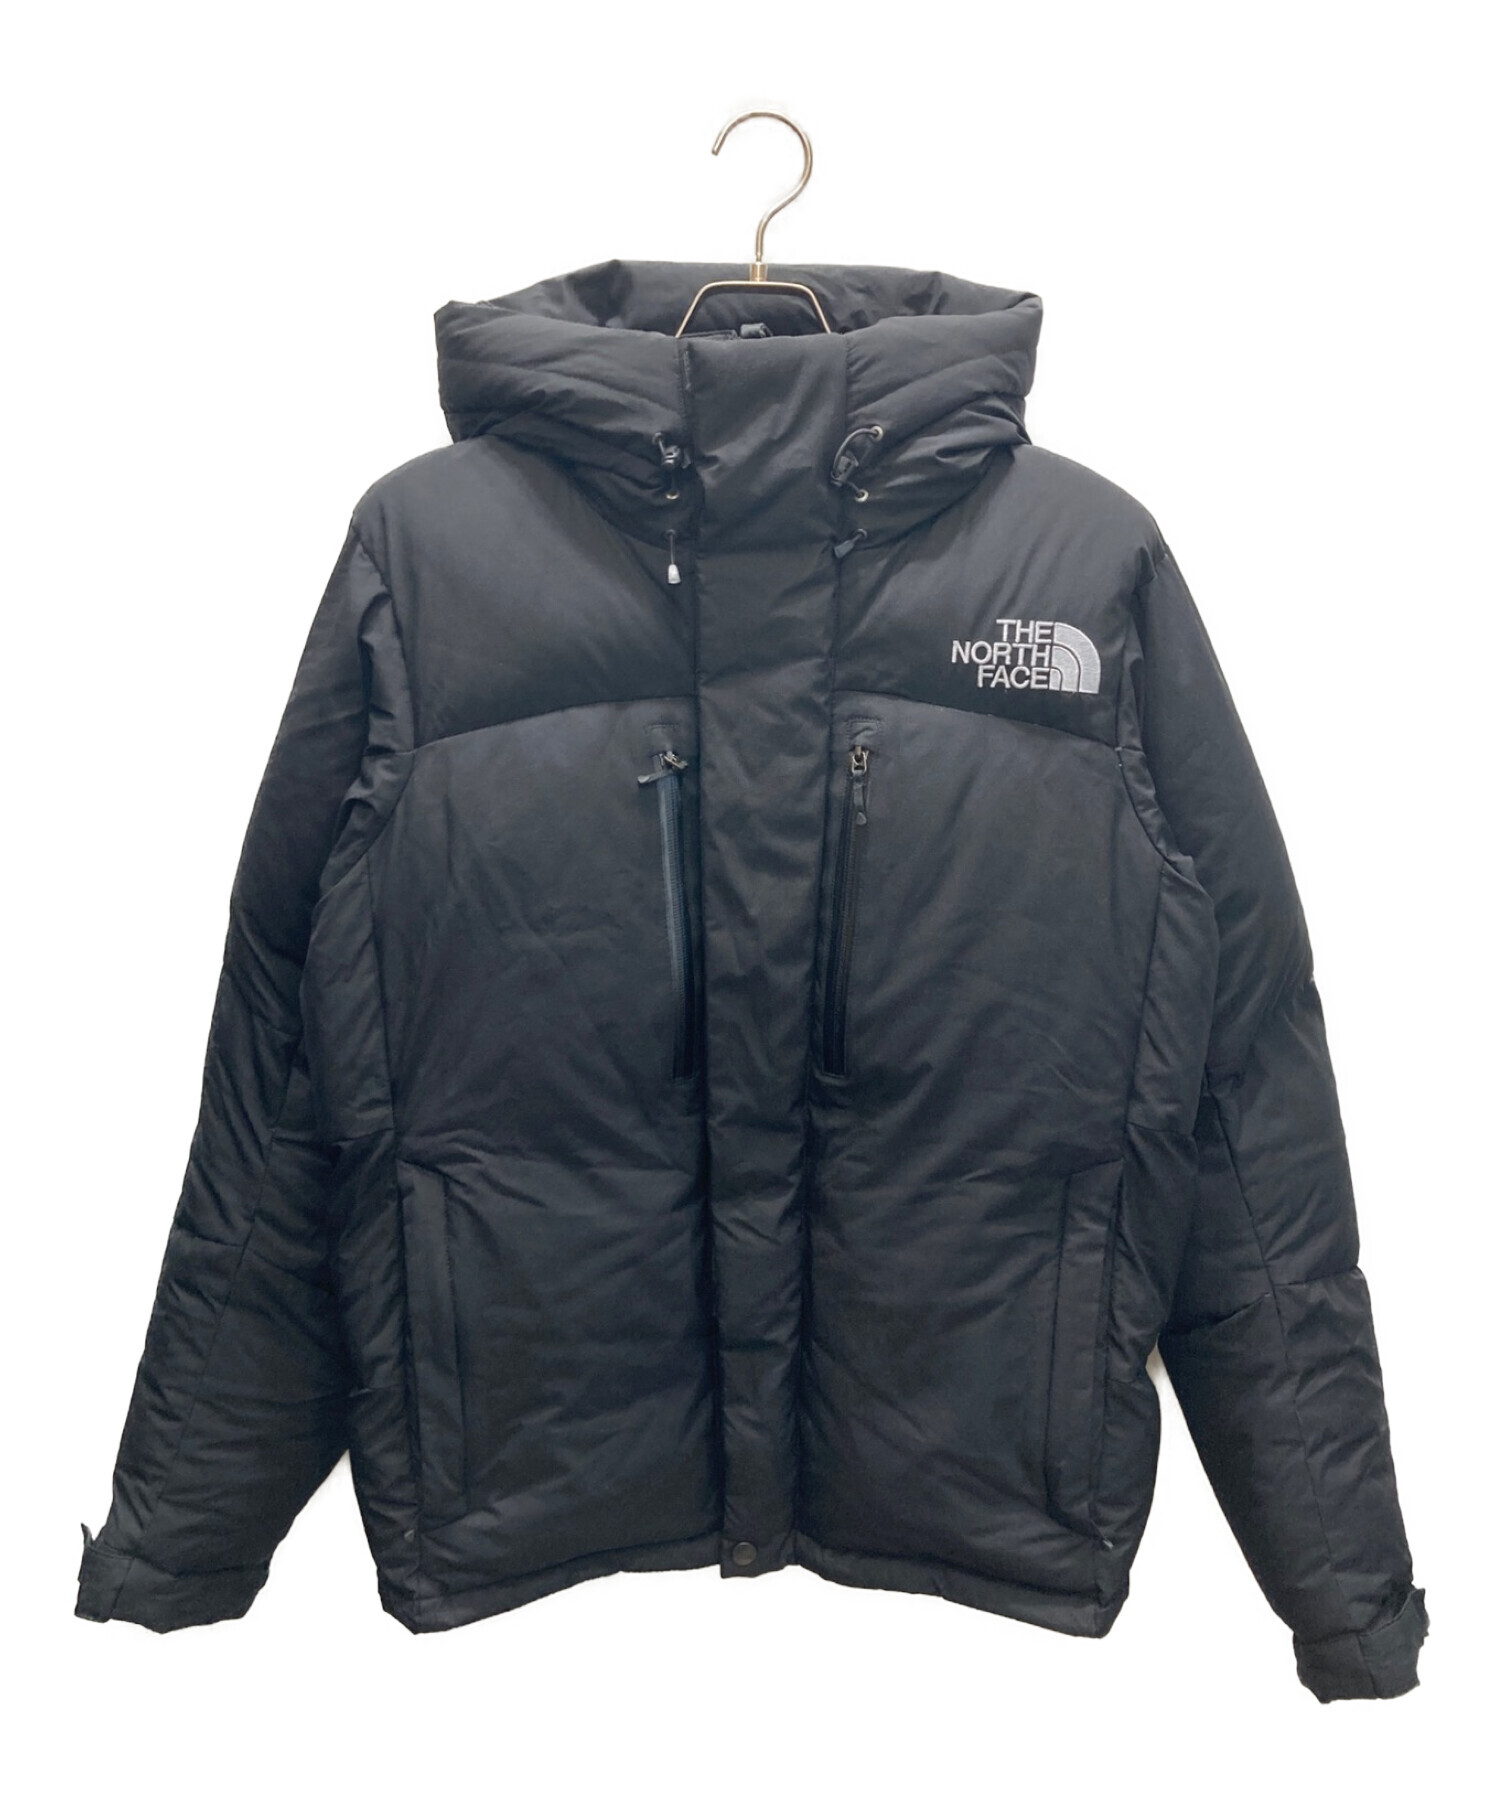 THE NORTH FACE◇BALTRO LIGHT JACKET_バルトロライトジャケット/XS 